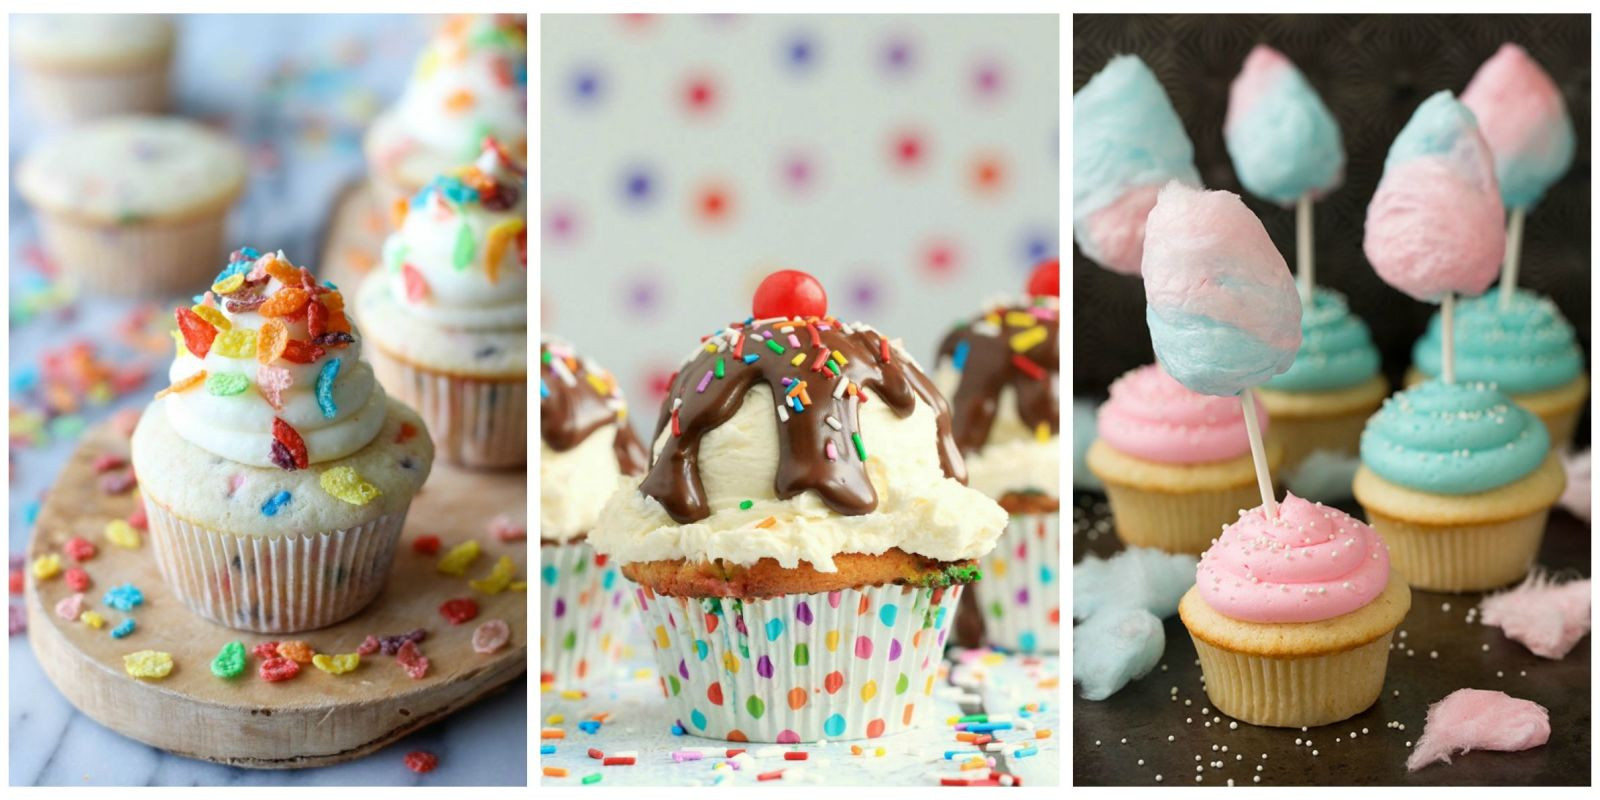 Kids Cupcake Recipes
 13 Best Cupcake Recipes For Kids Best Ideas for Kids